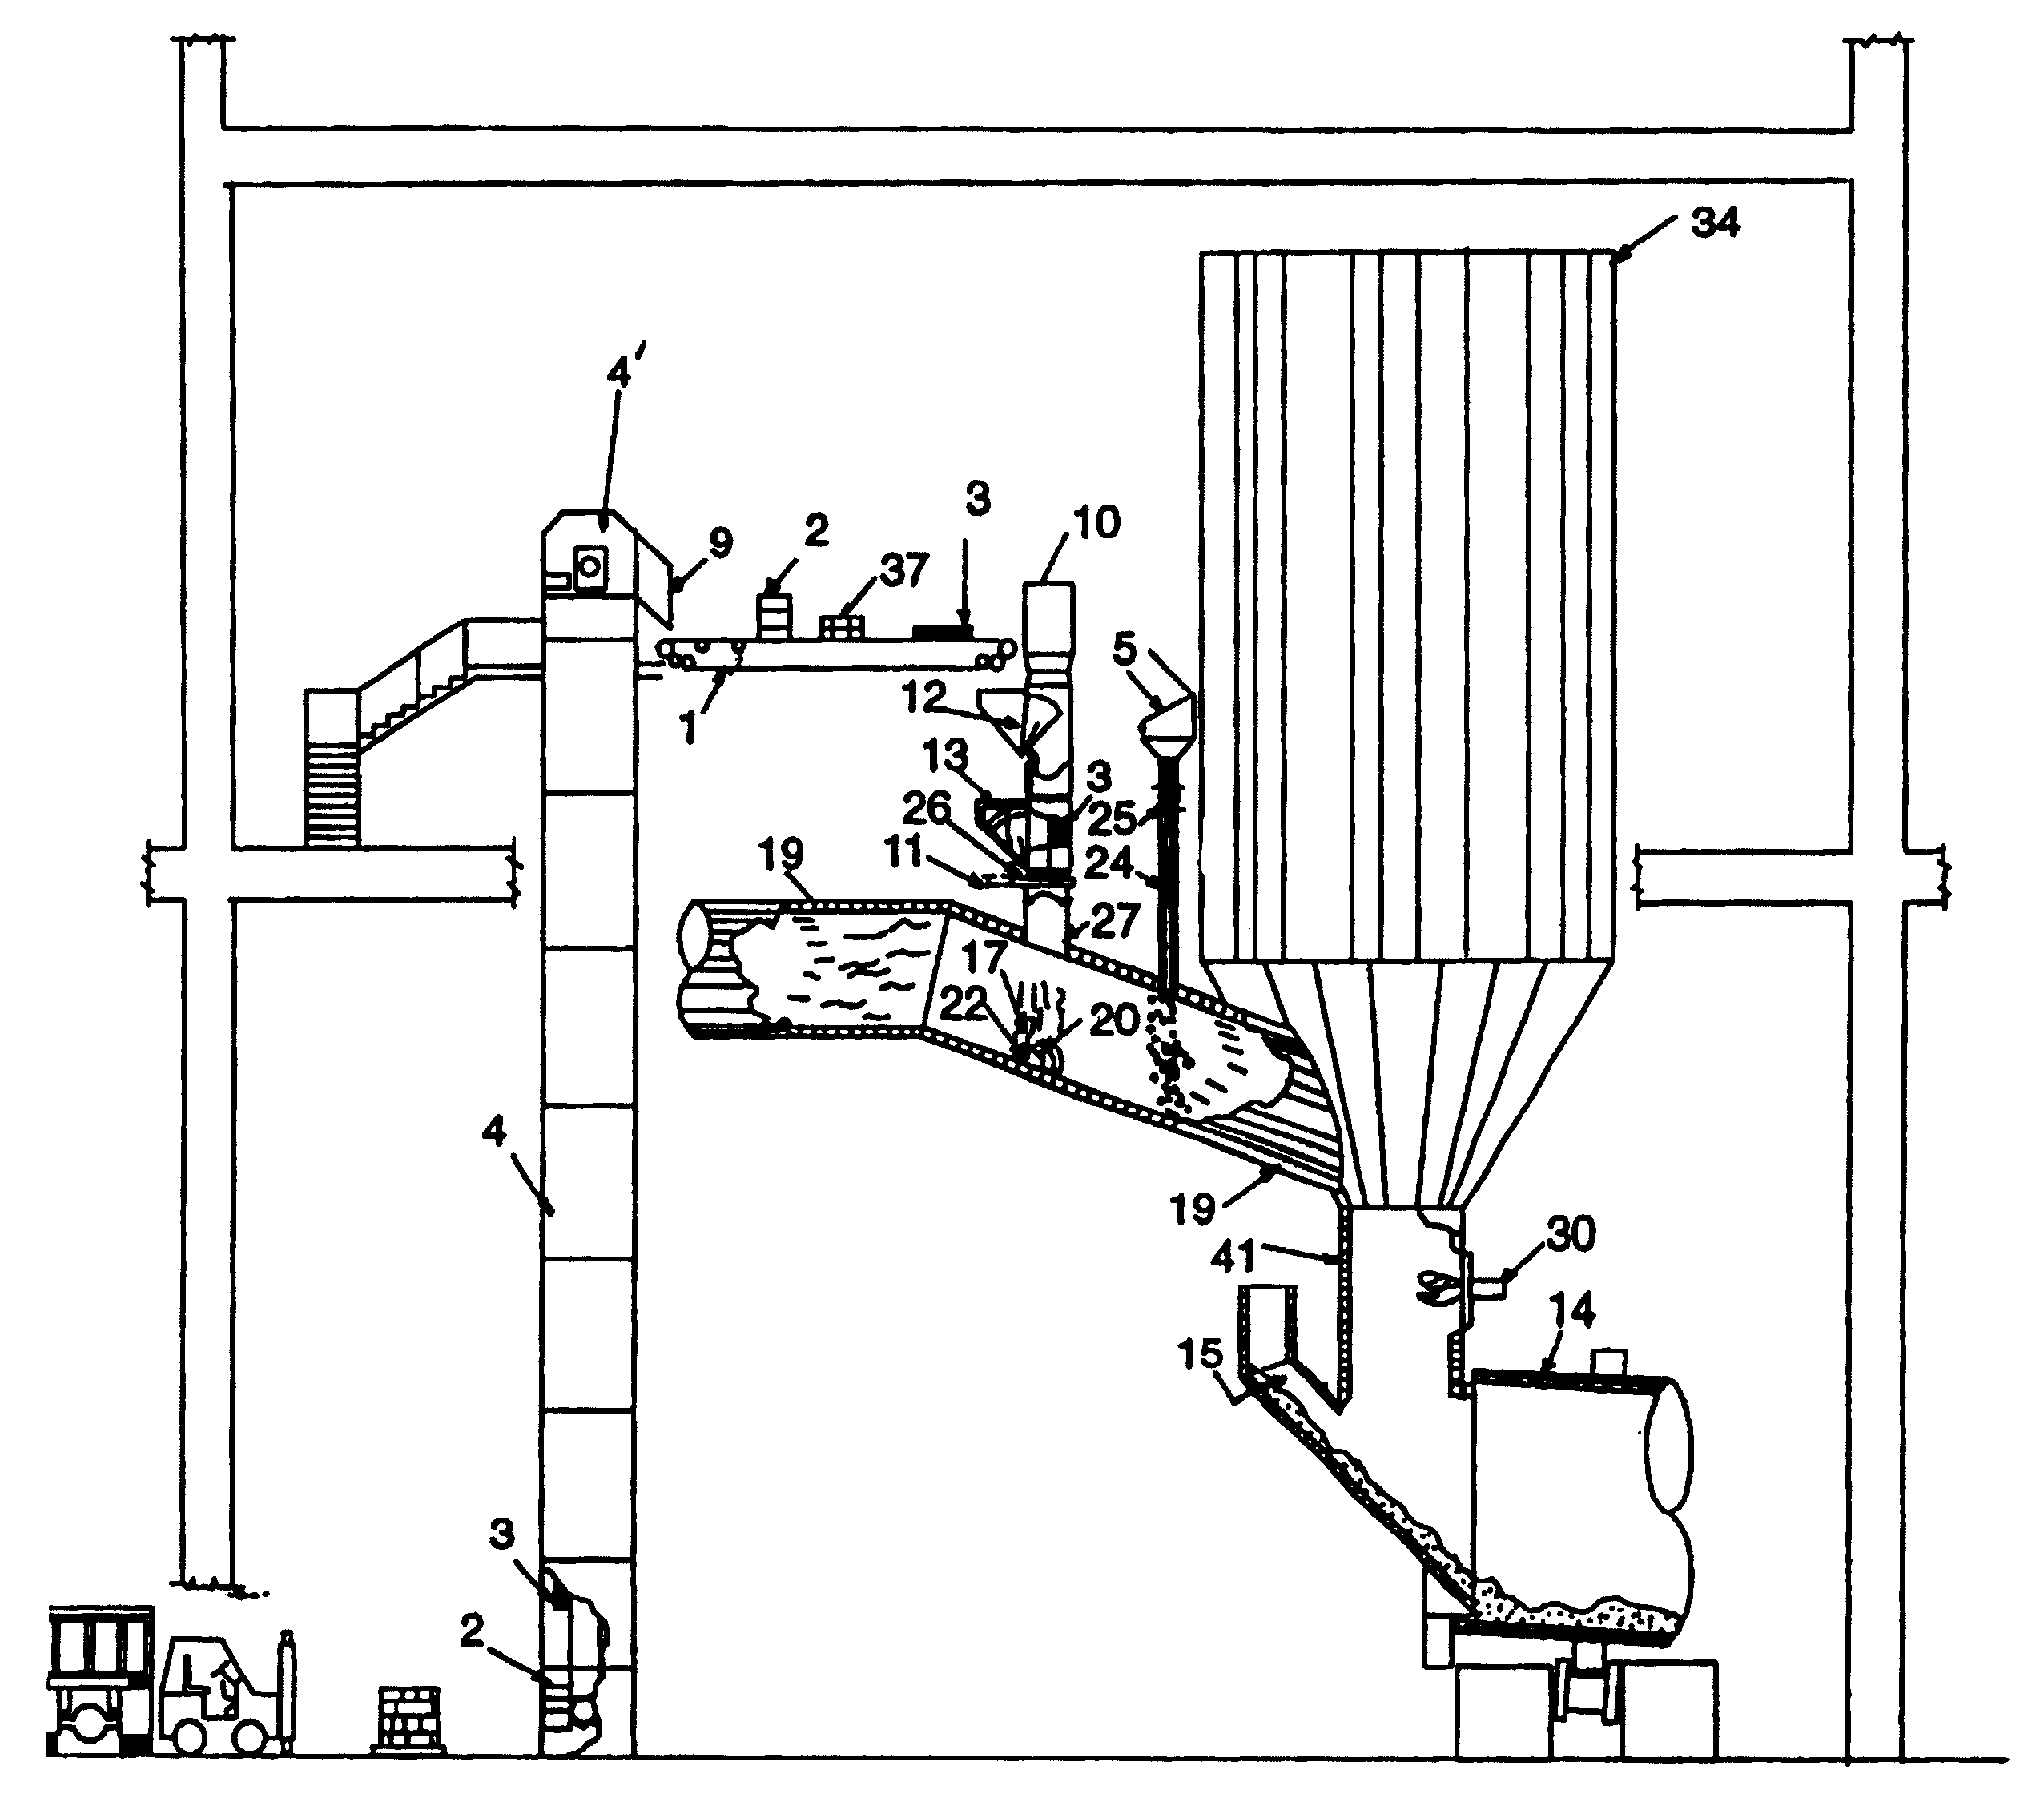 Method and apparatus for recovering energy from wastes by combustion in industrial furnaces